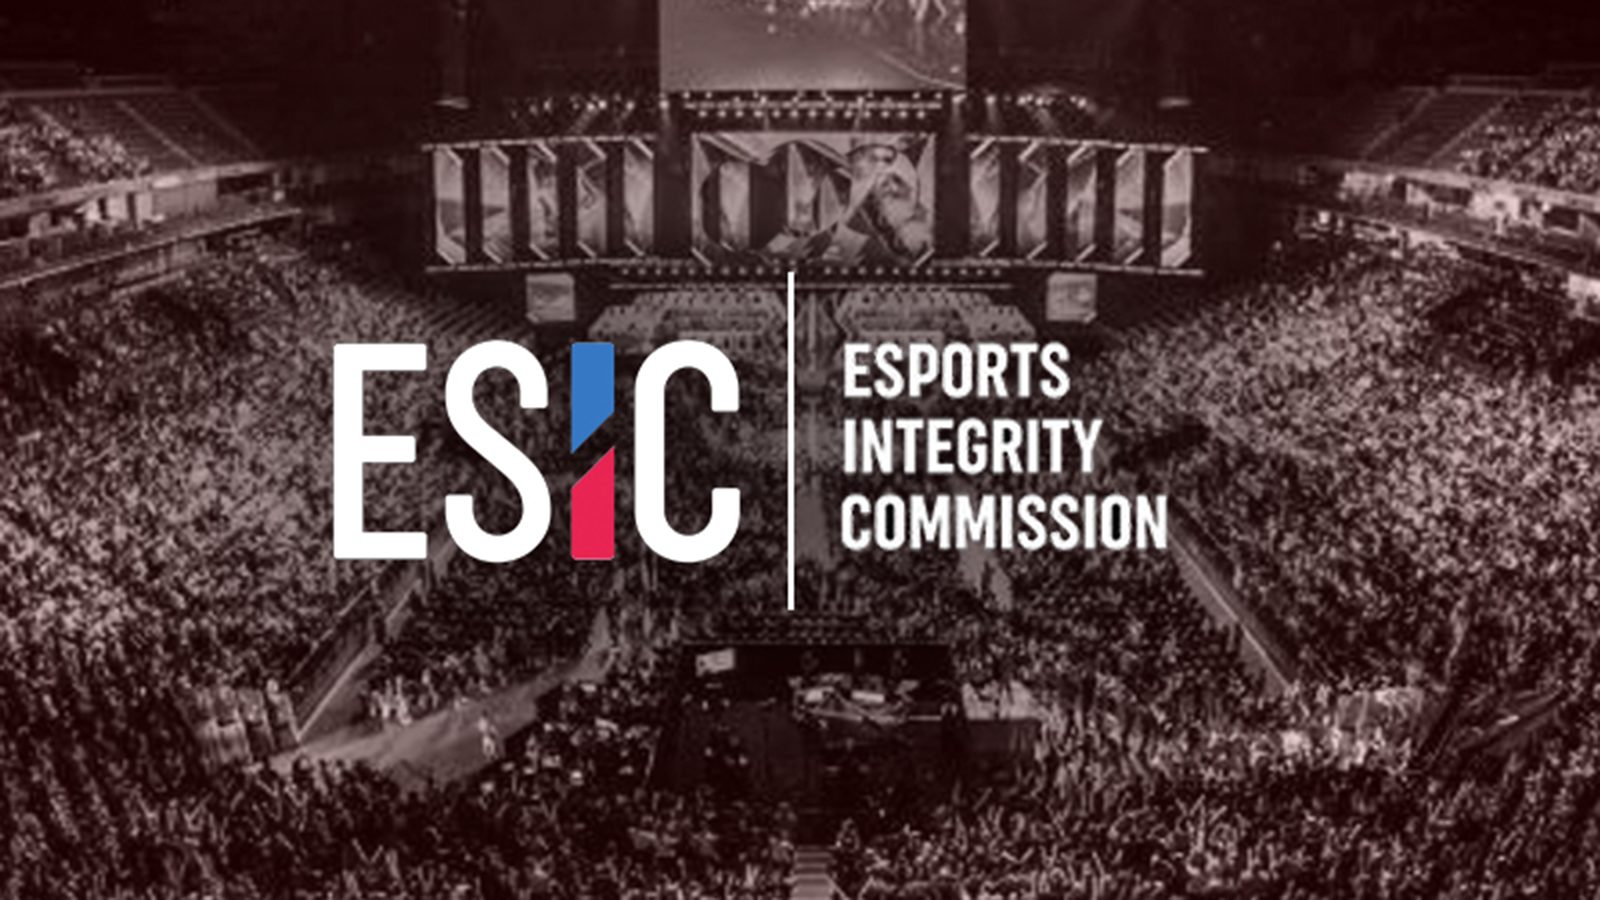 Esports Player Deluxe Receives Two-Year Ban for Match Fixing